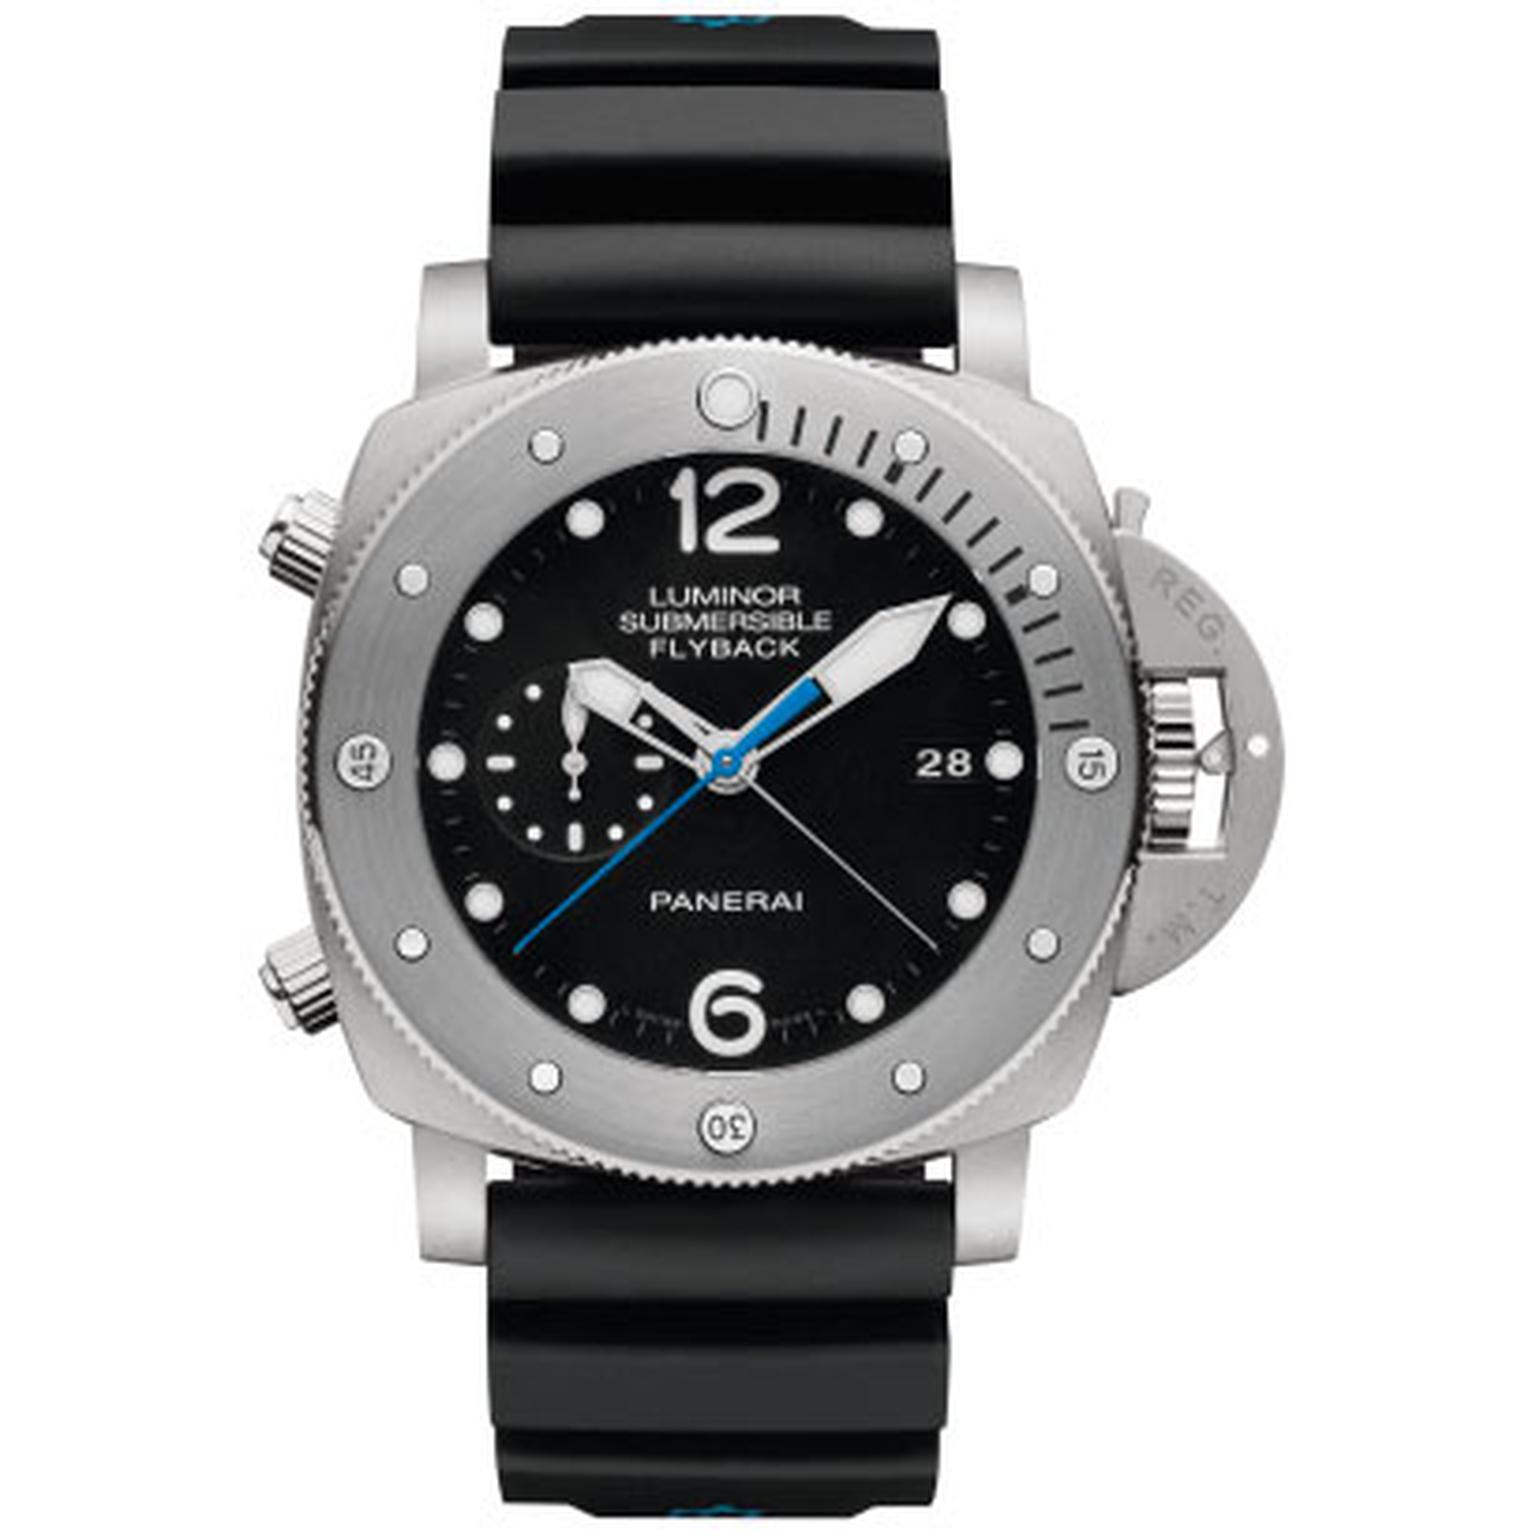 Theme ws Watch diver square